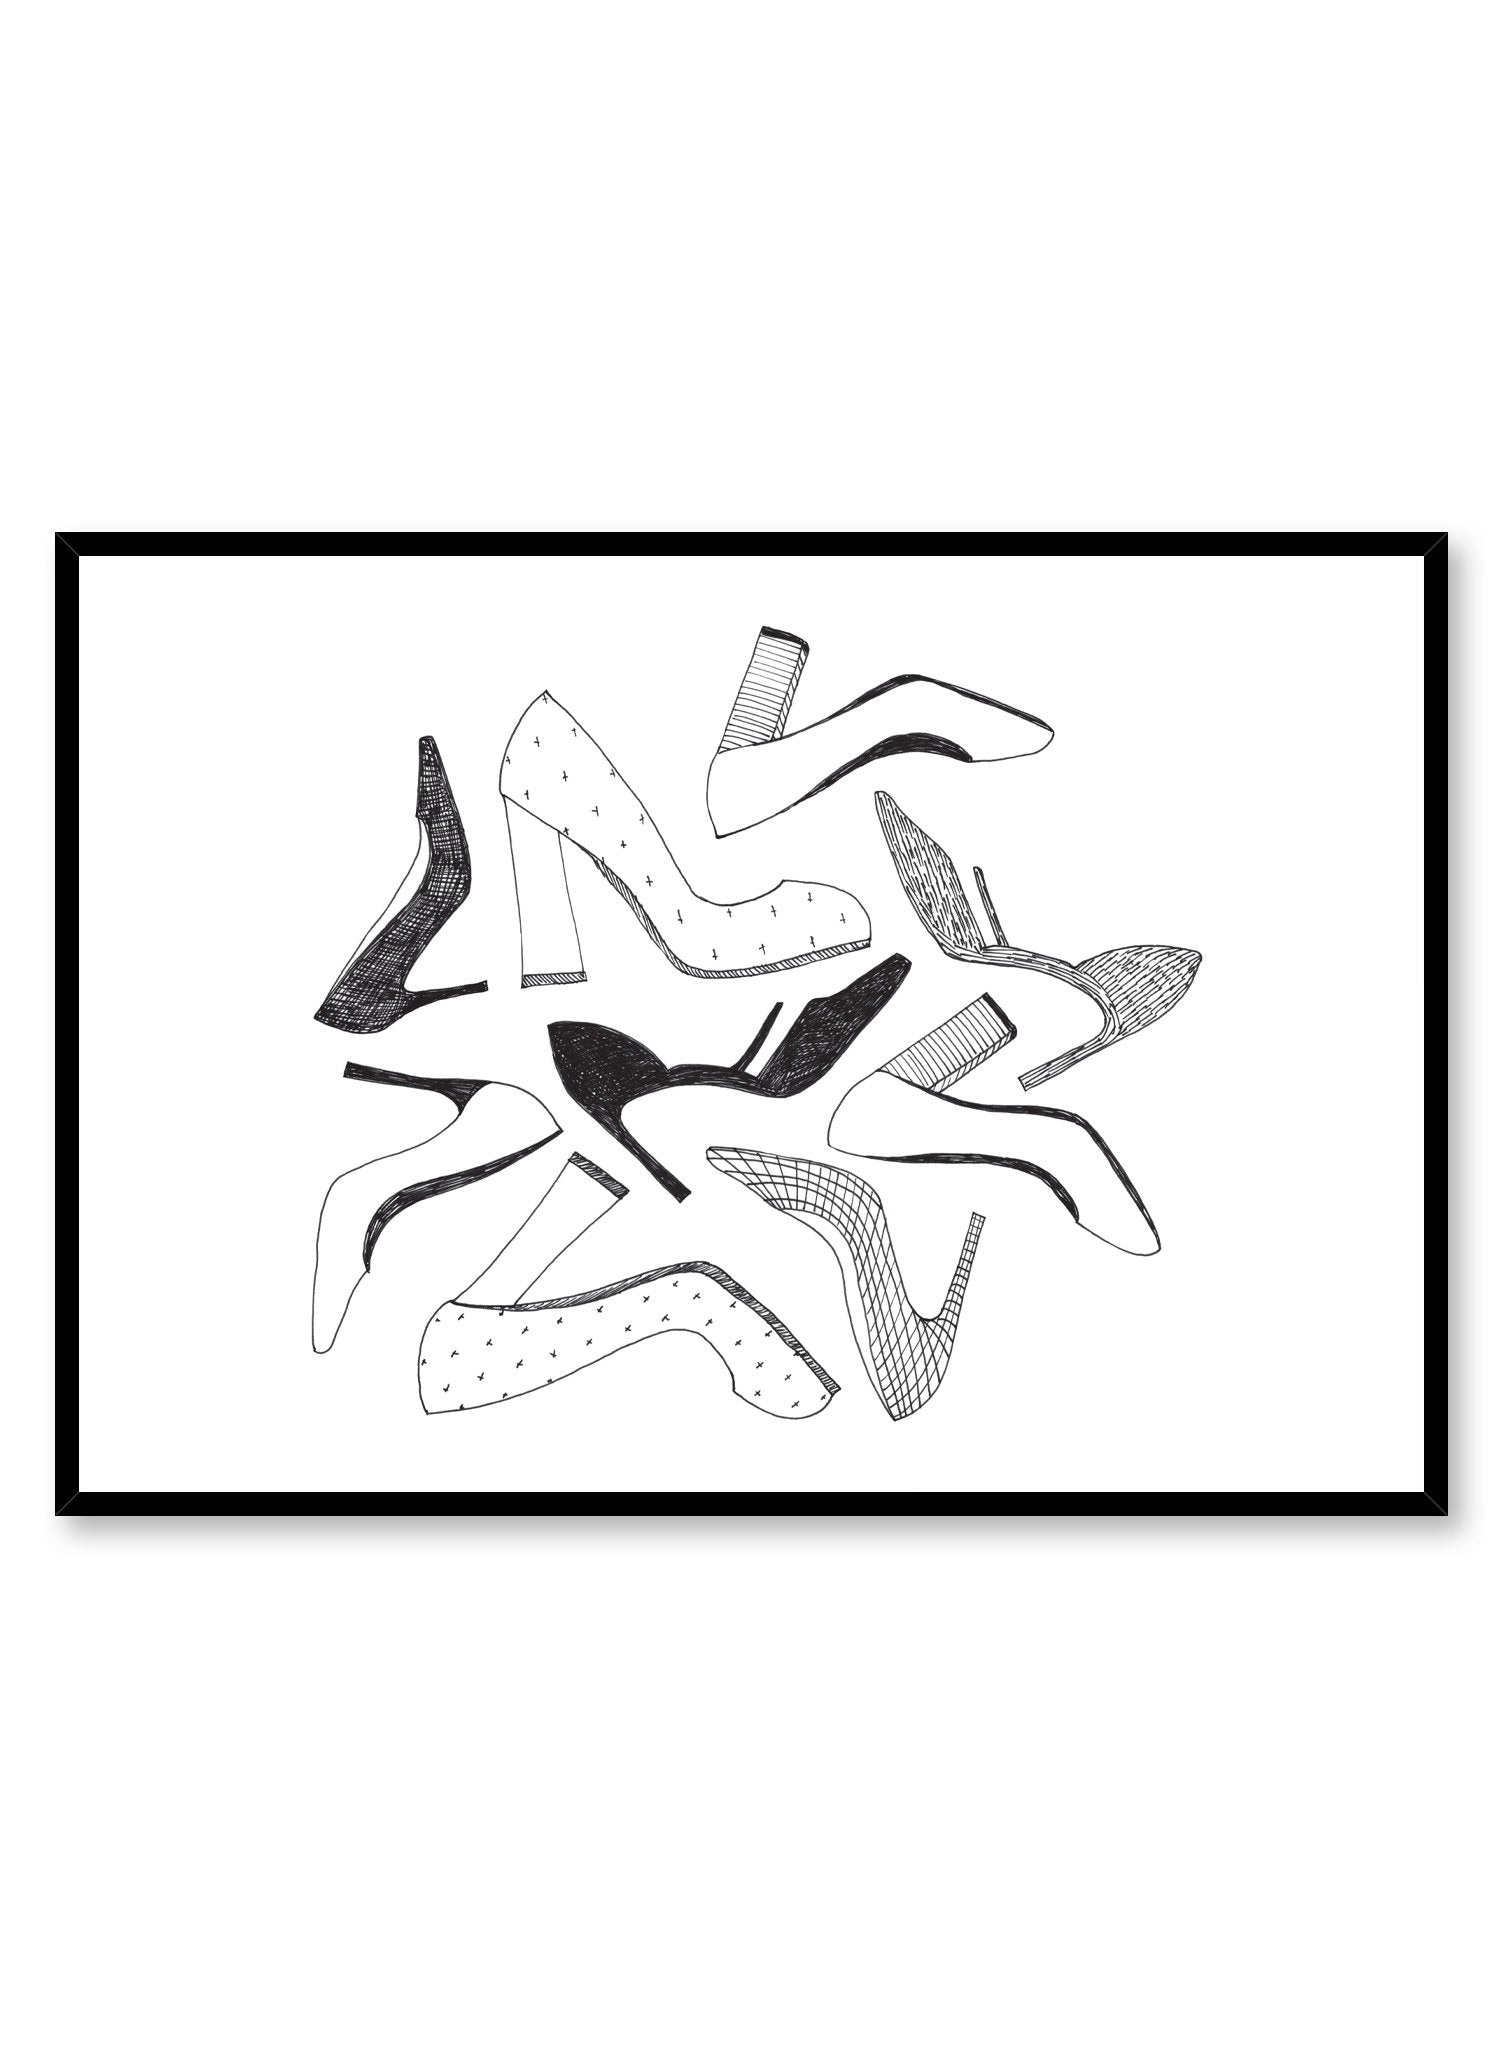 Fashion illustration poster by Opposite Wall with drawing of many high heel shoes